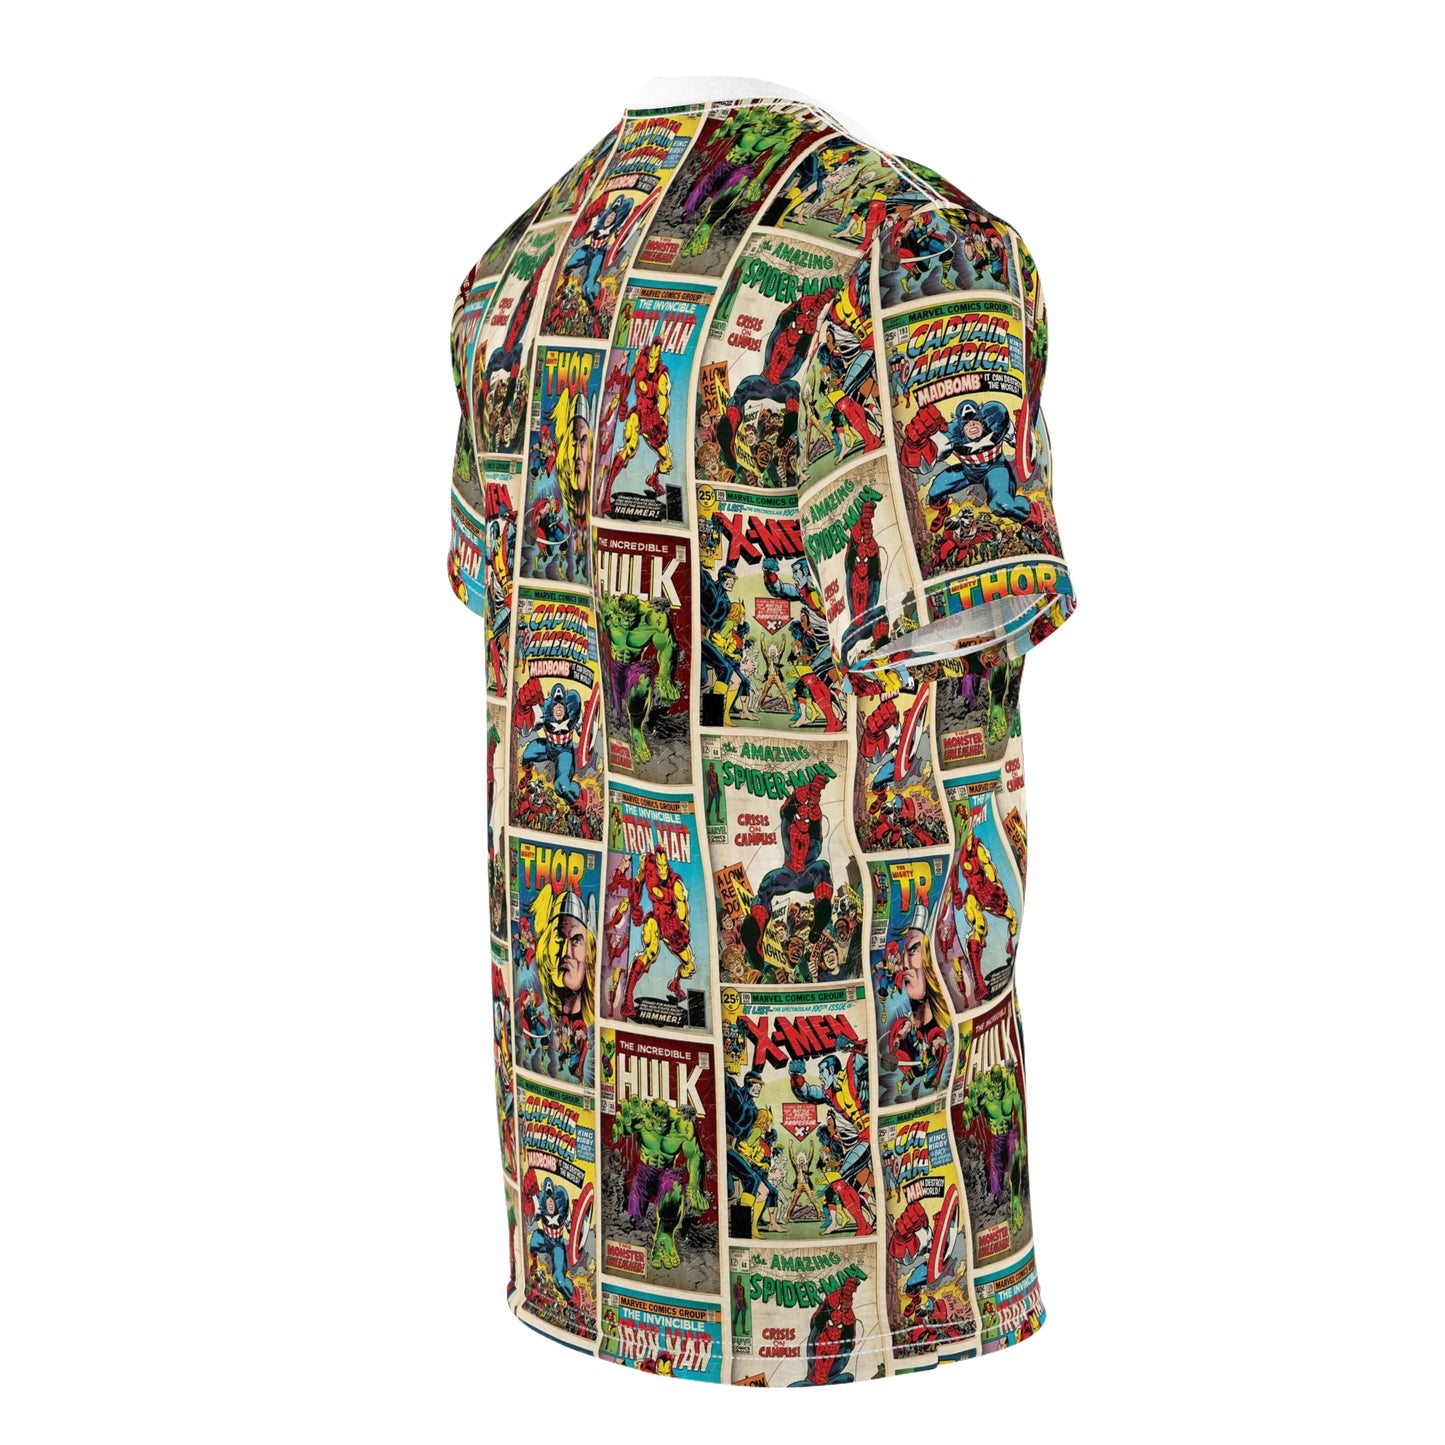 Marvel Comic Book Cover Collage Unisex Tee Shirt